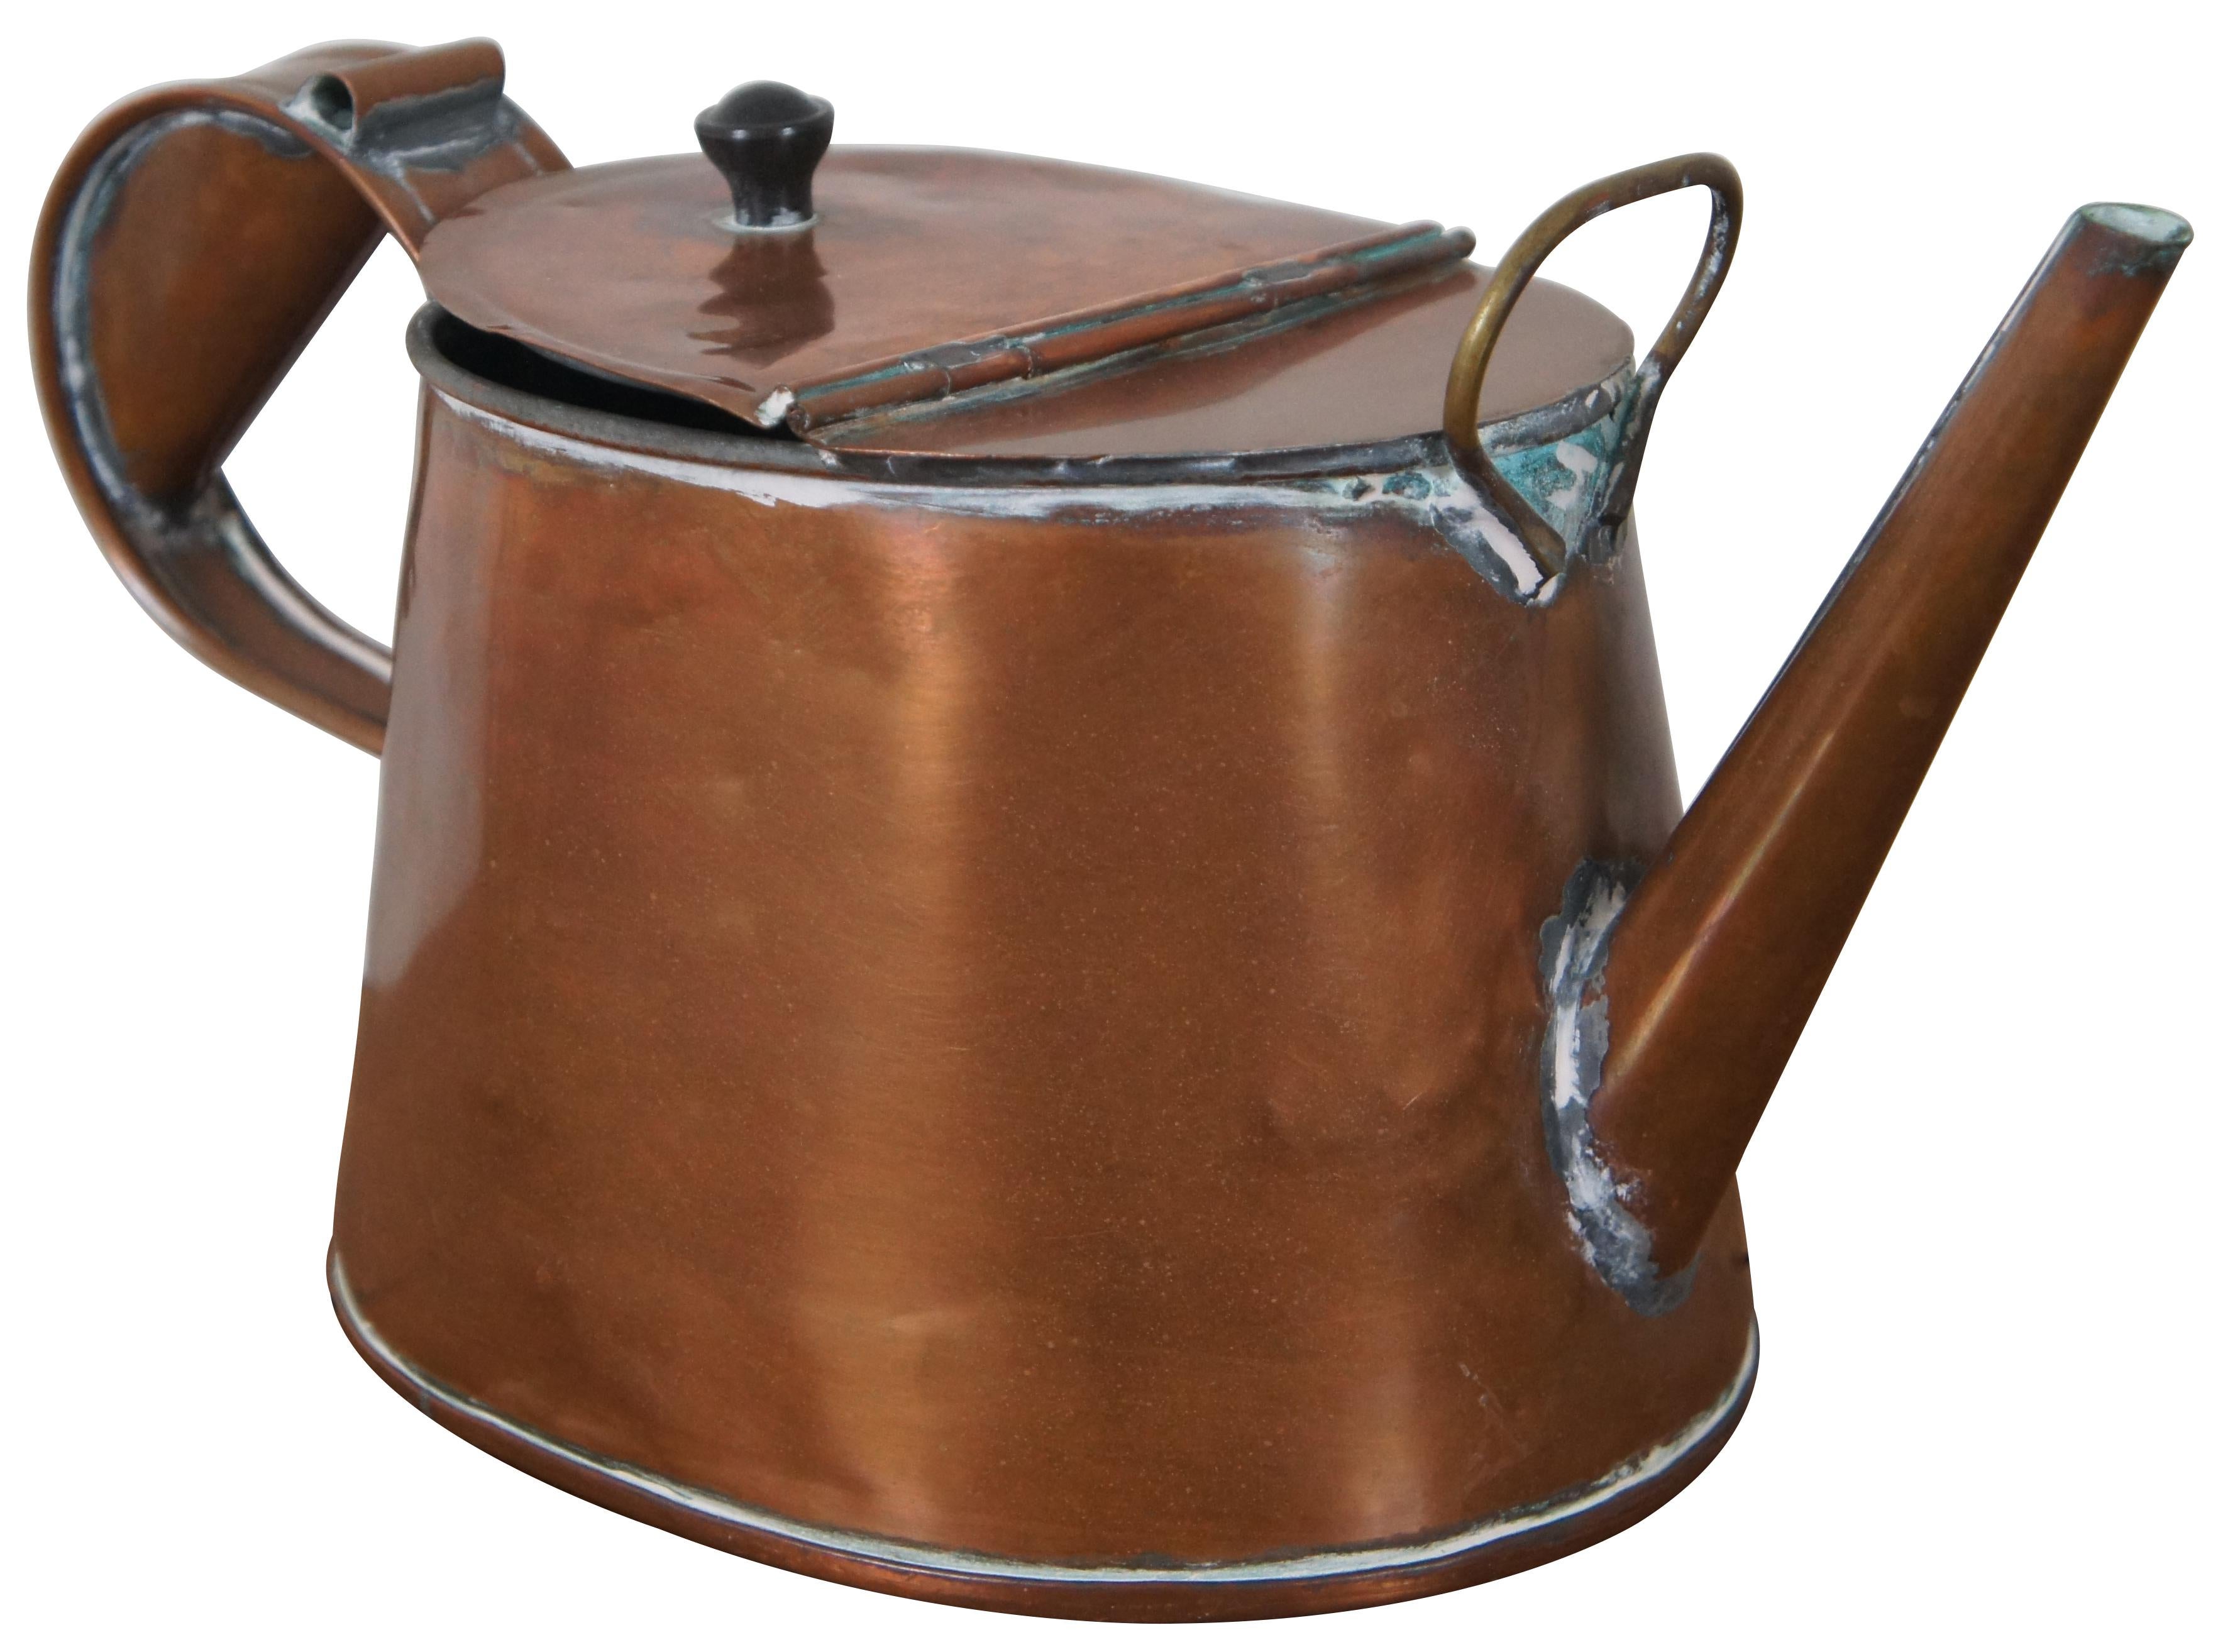 Antique 19th century copper tea kettle with oval body, straight spout, large flip top opening, hefty handle and brass ring at the front. Measure:14